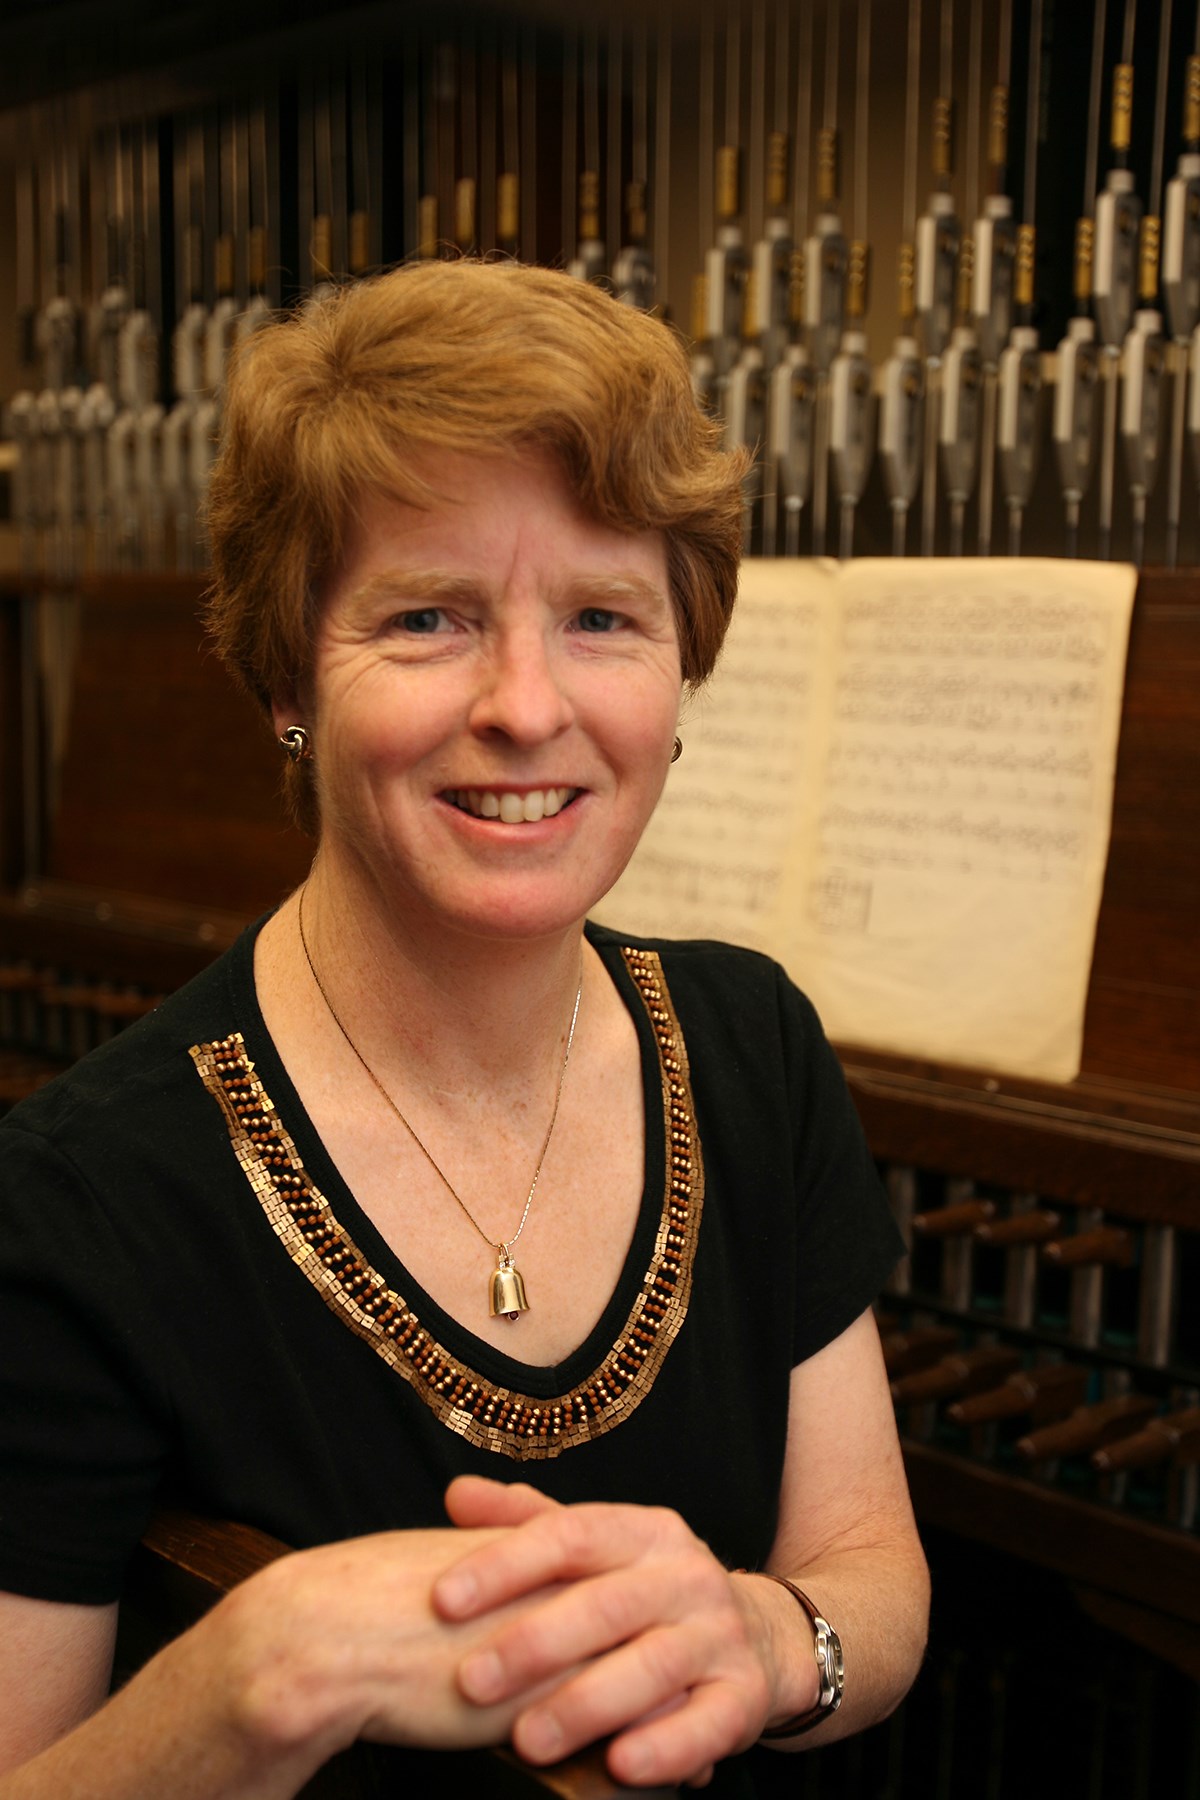 Dominion Carillonneur Andrea McCrady prepares to play the Peace Tower carillon on Parliament Hill in Ottawa on December 13, 2013. Dr. McCrady has been the Dominion Carillonneur since 2008. The wooden keyboard console is the original from 1927. (Photo credit: House of Commons)